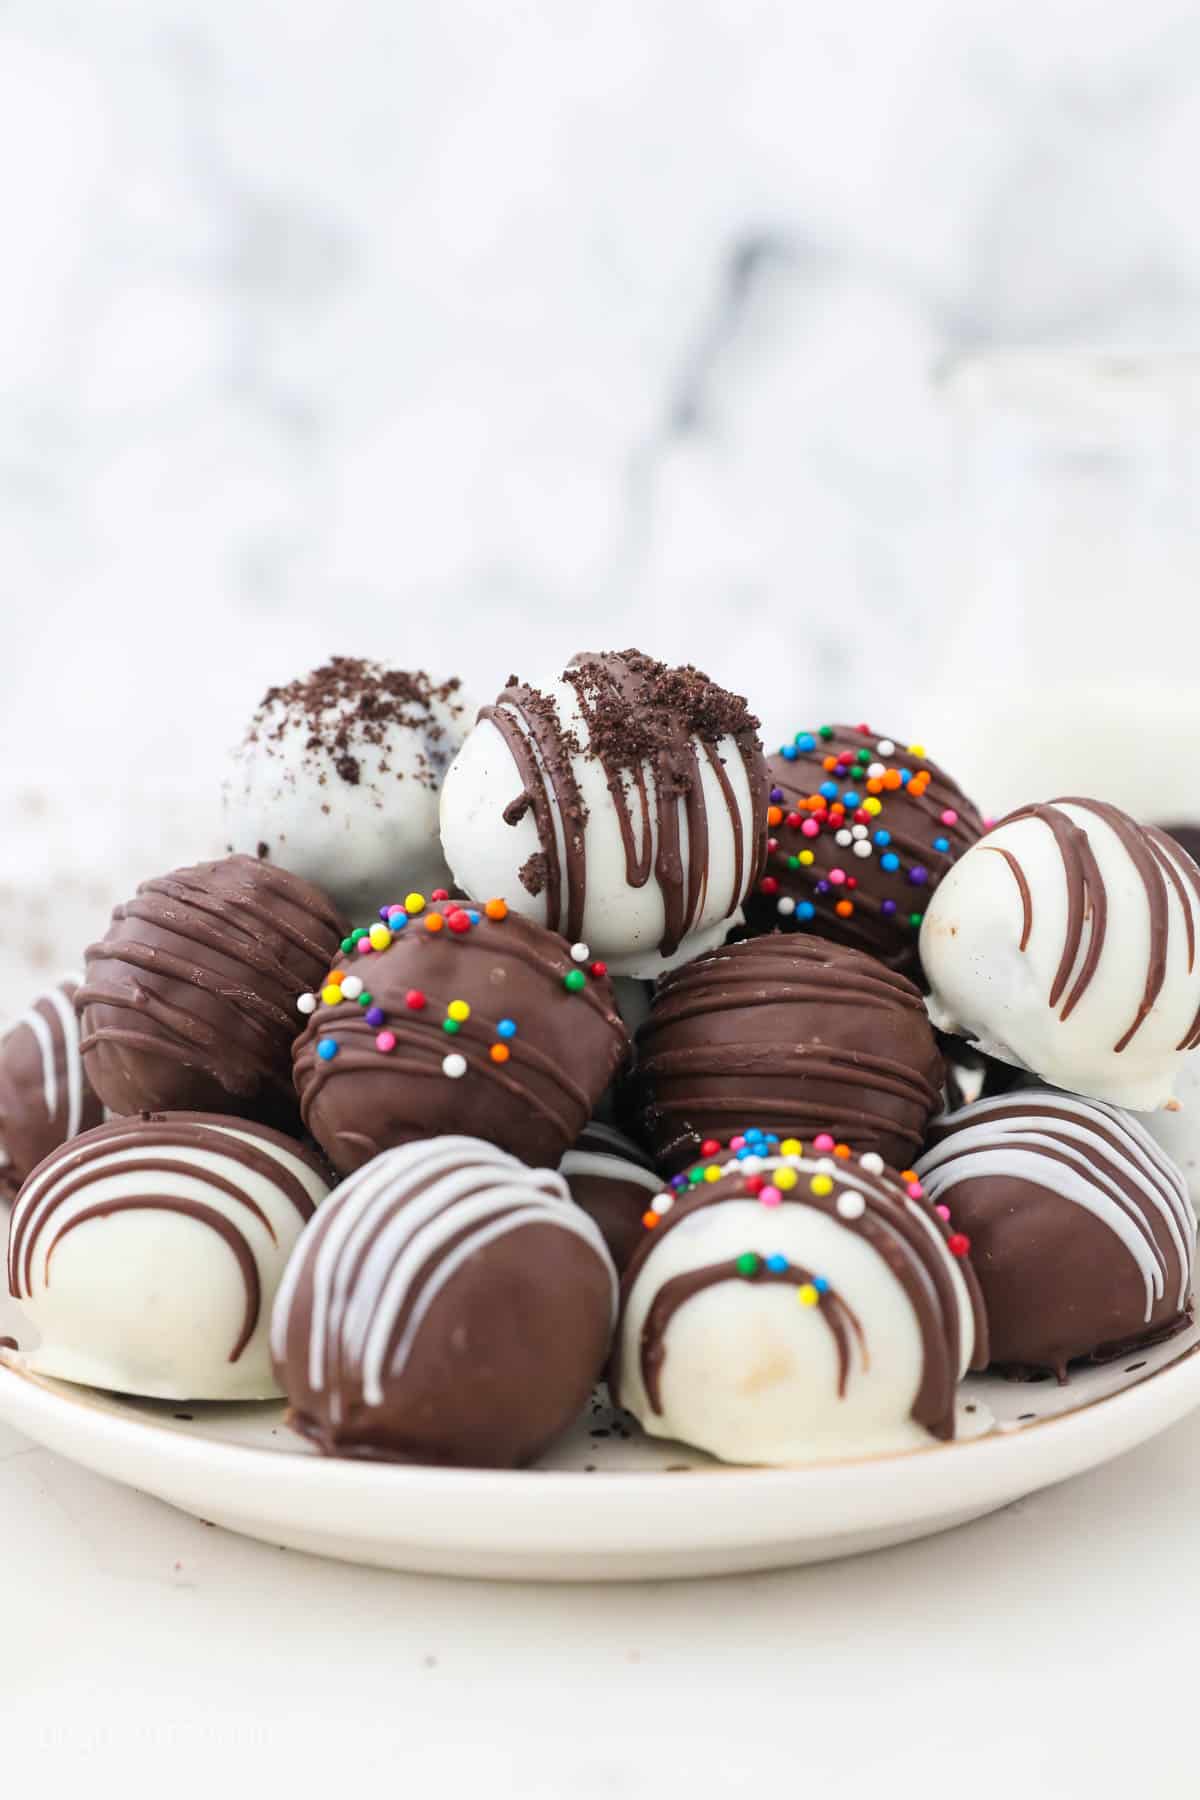 A pile of finished Oreo Truffles on a plate.